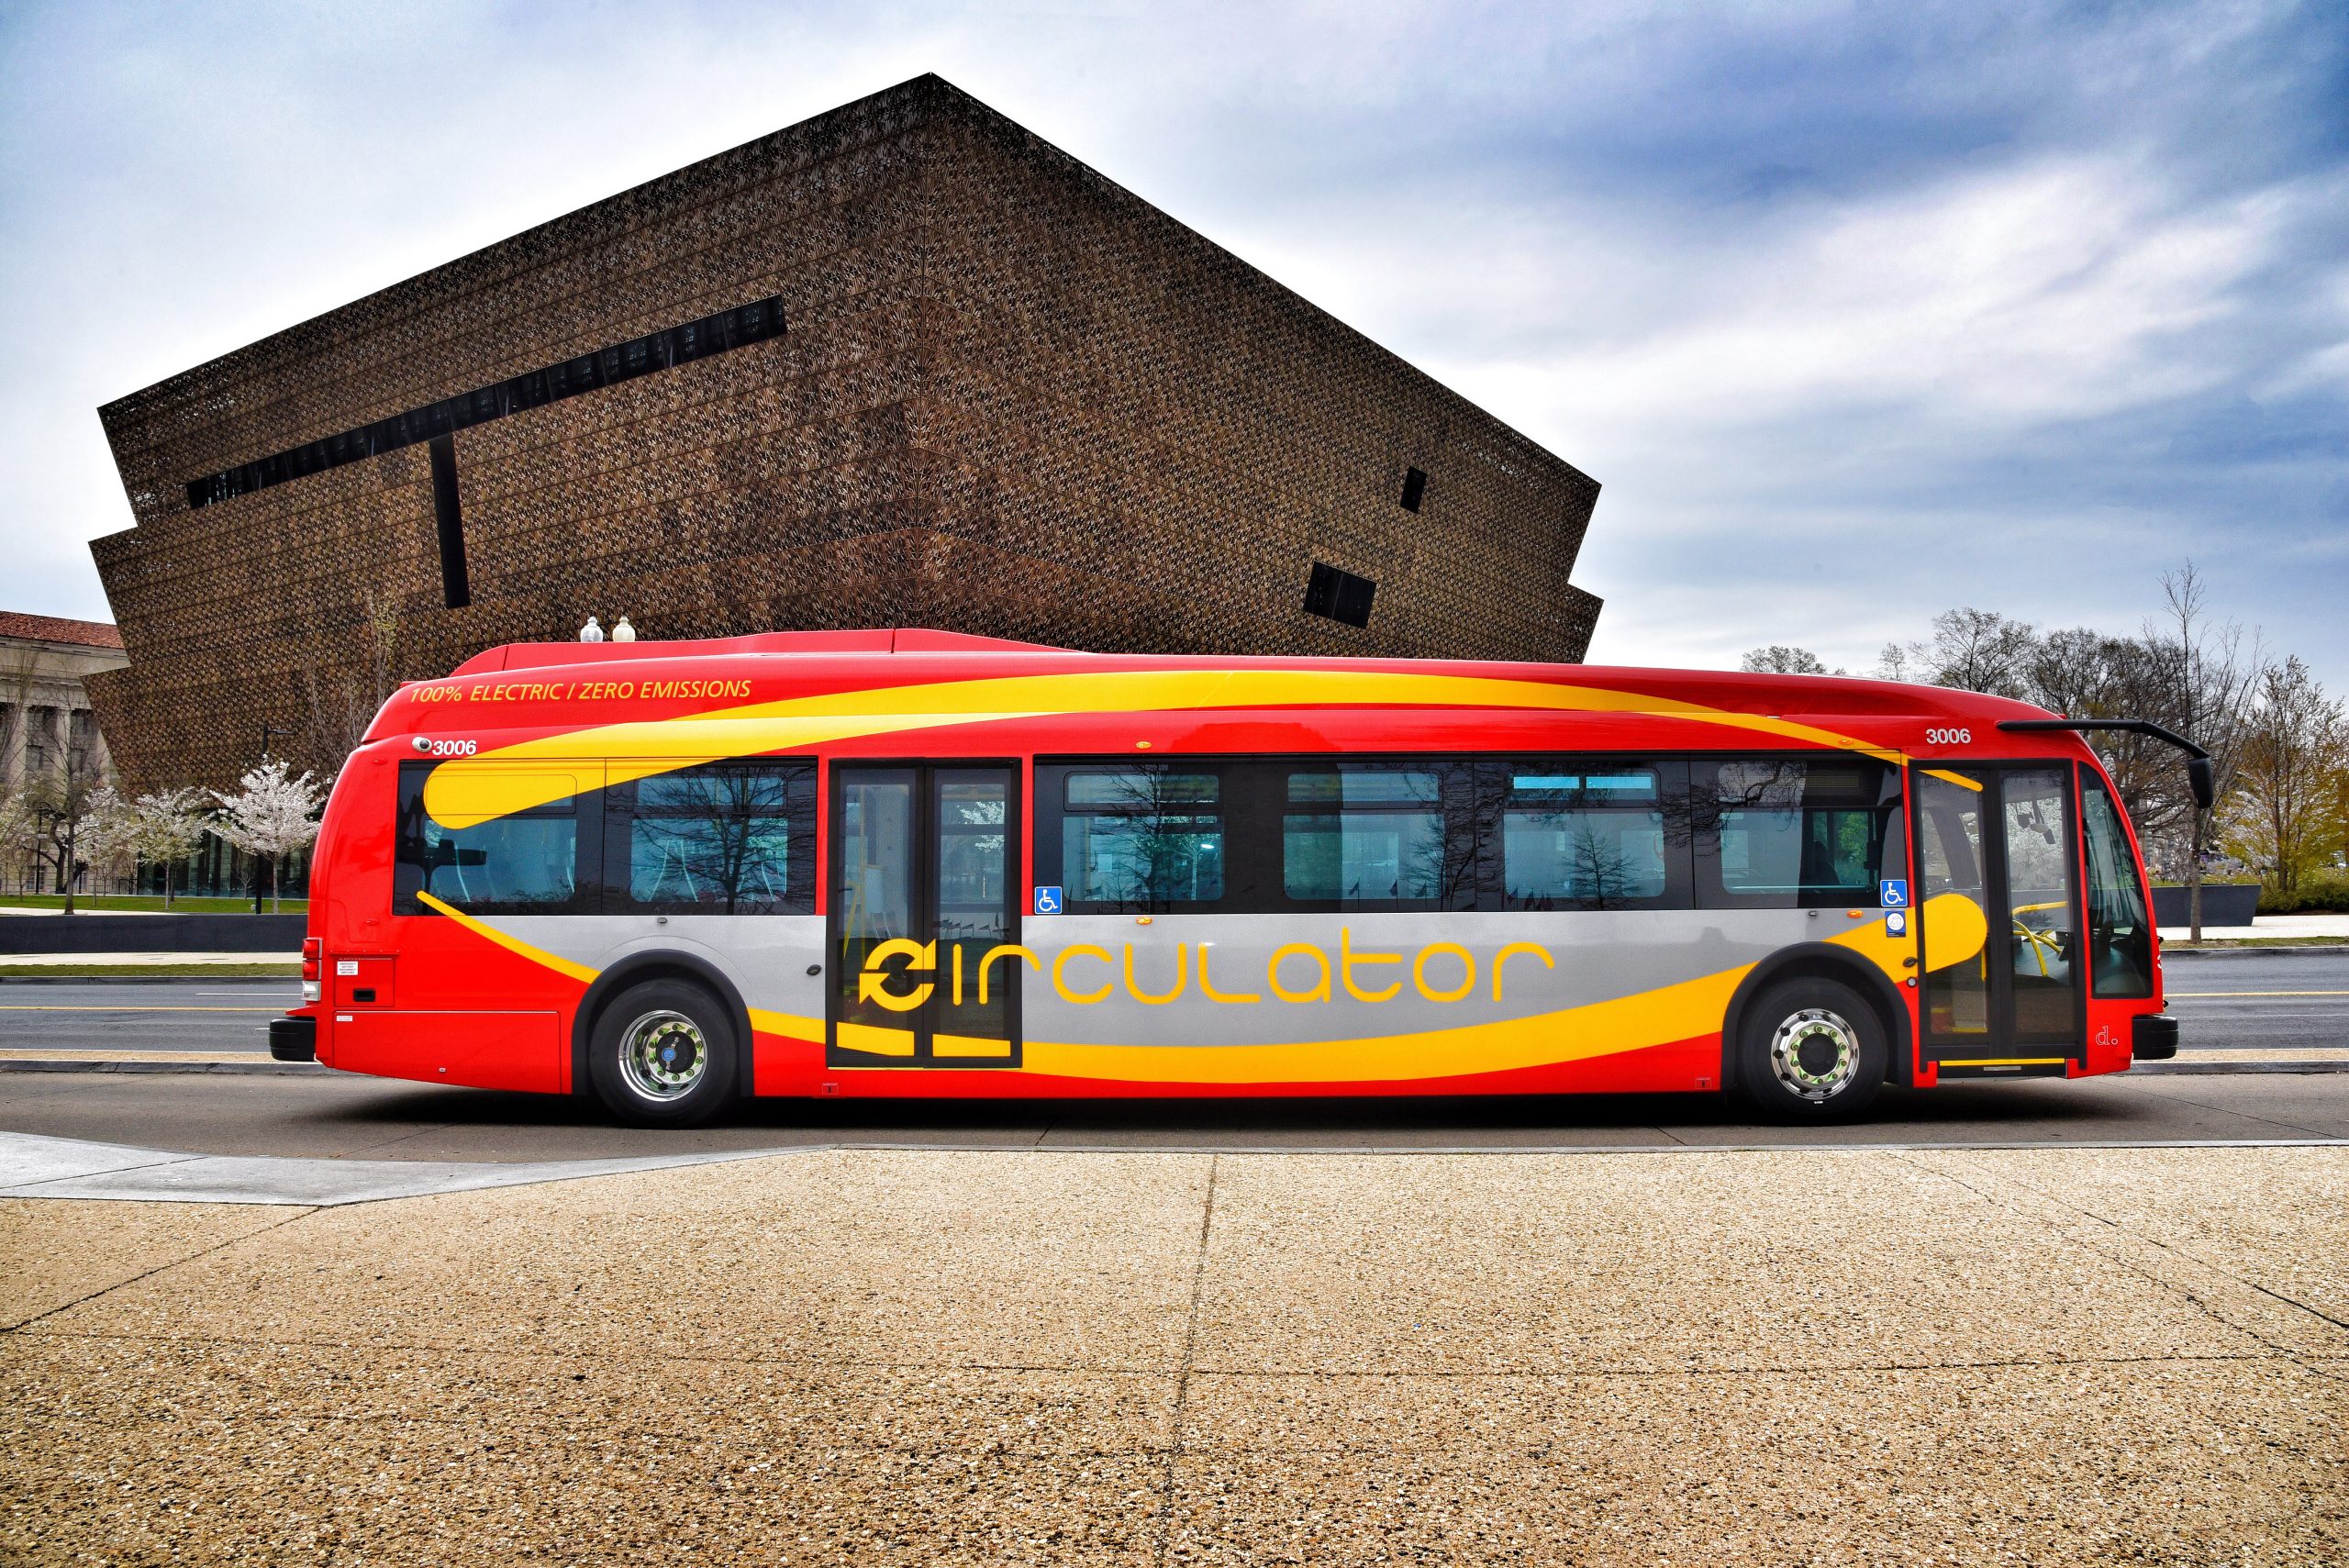 NEWS | £2.4 million set to be spent on ‘City Zipper’ project to deliver electric buses and an improved bus services in Hereford